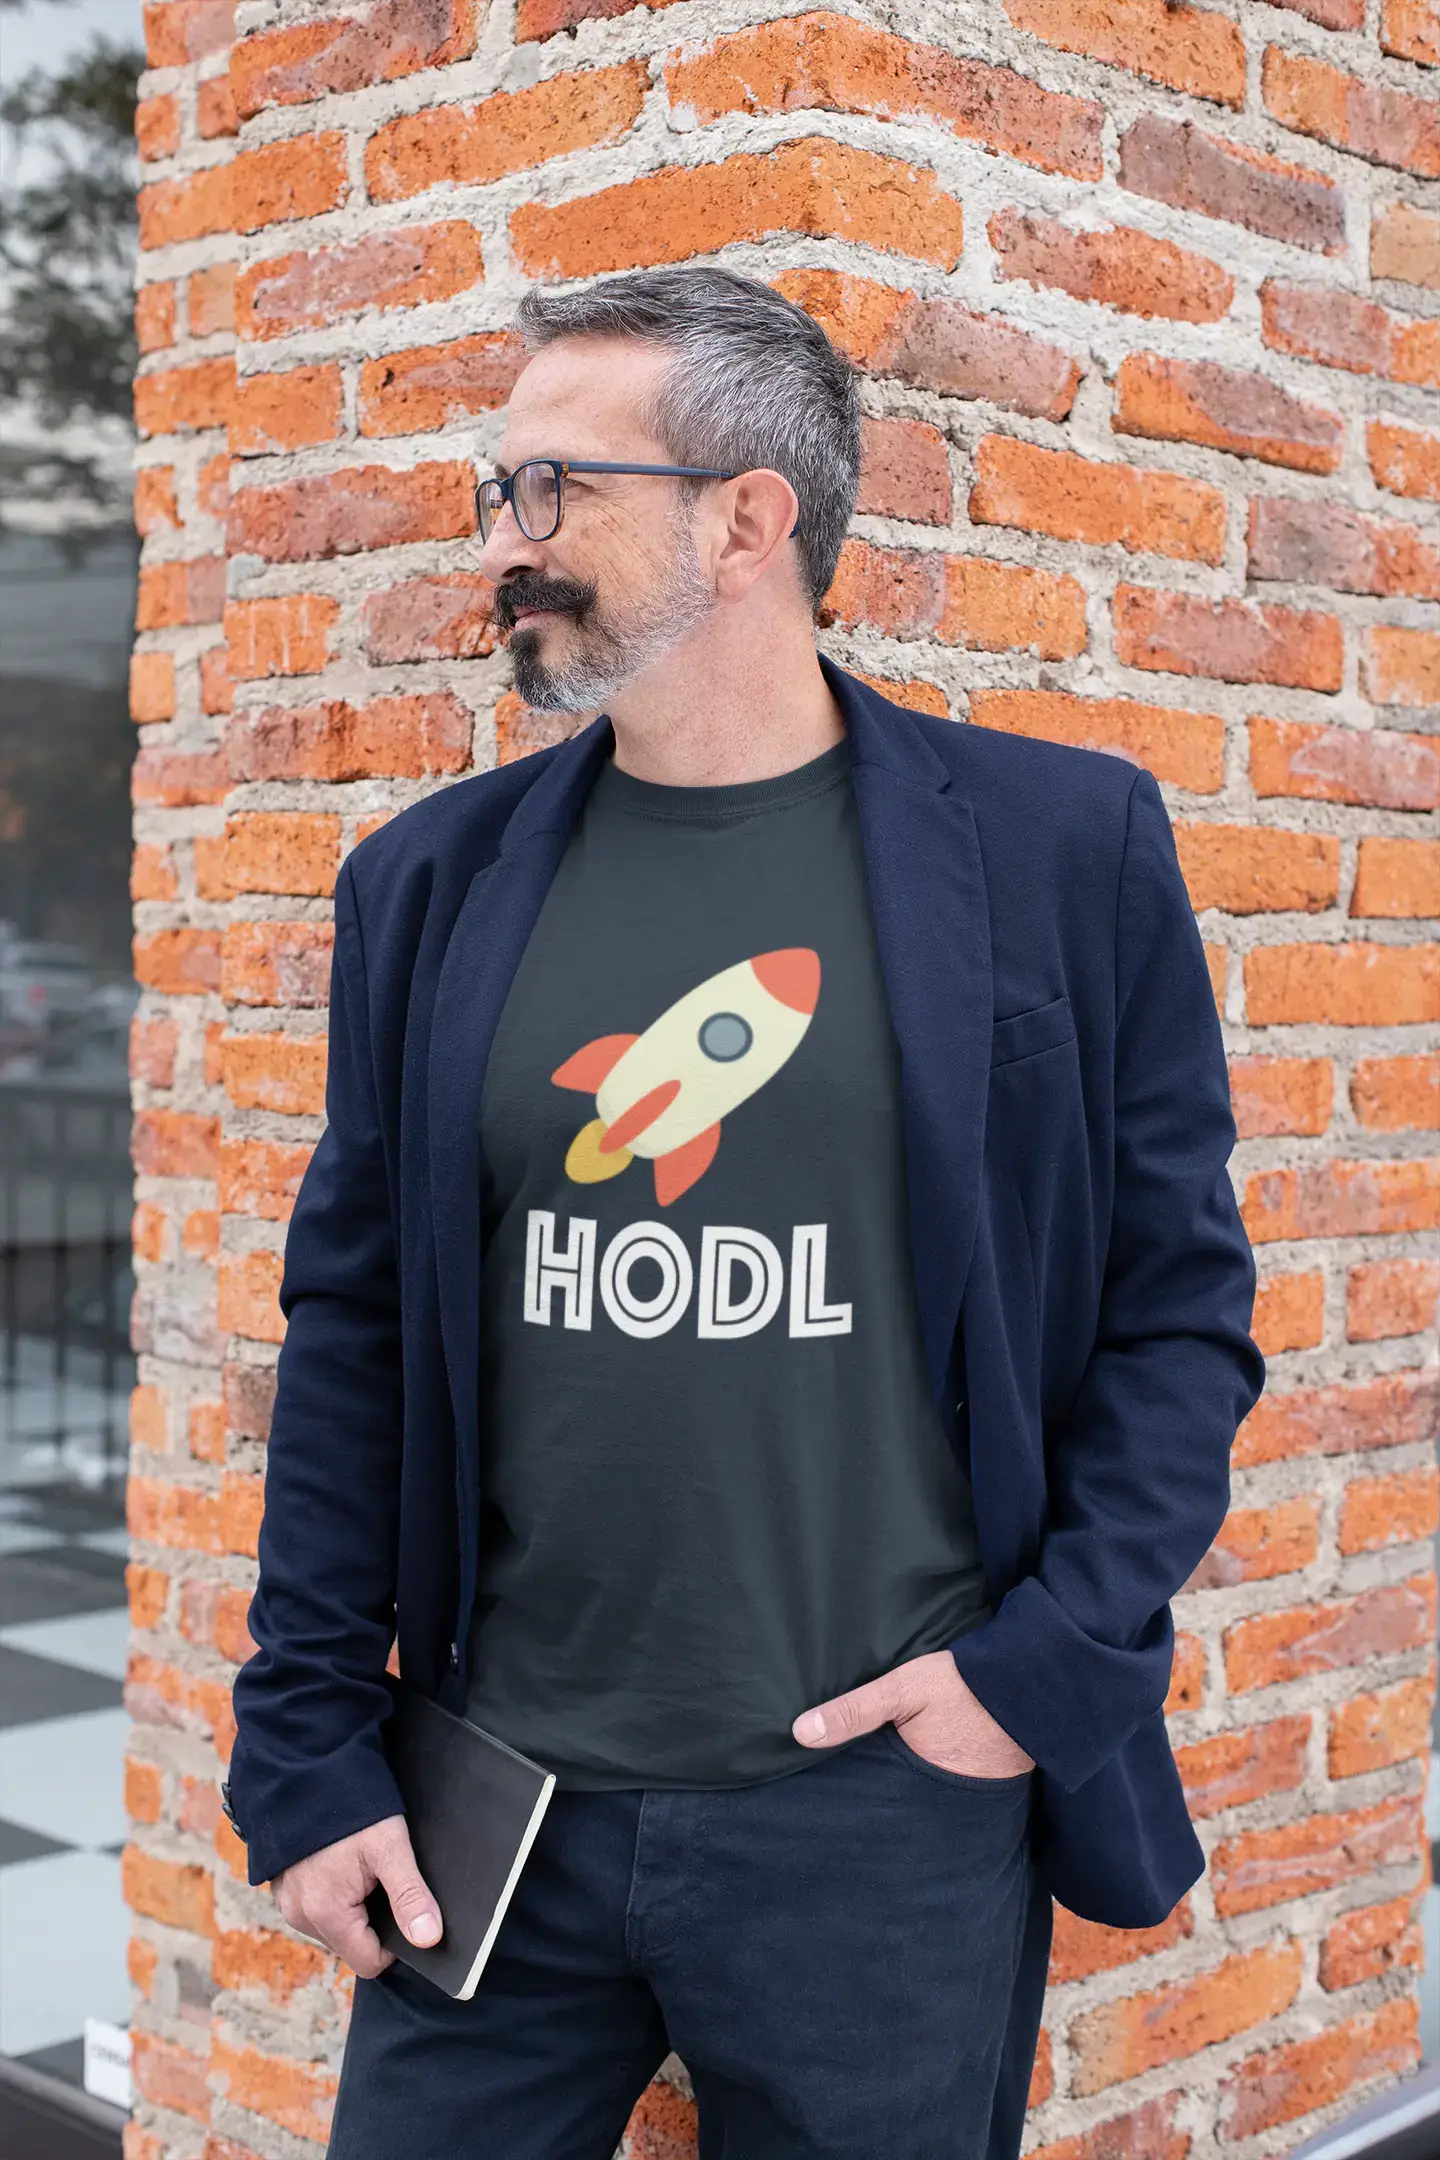 Men's Graphic T-Shirt Hodl To The Moon T-Shirt Crypto Tee Funny Traders Gift Idea